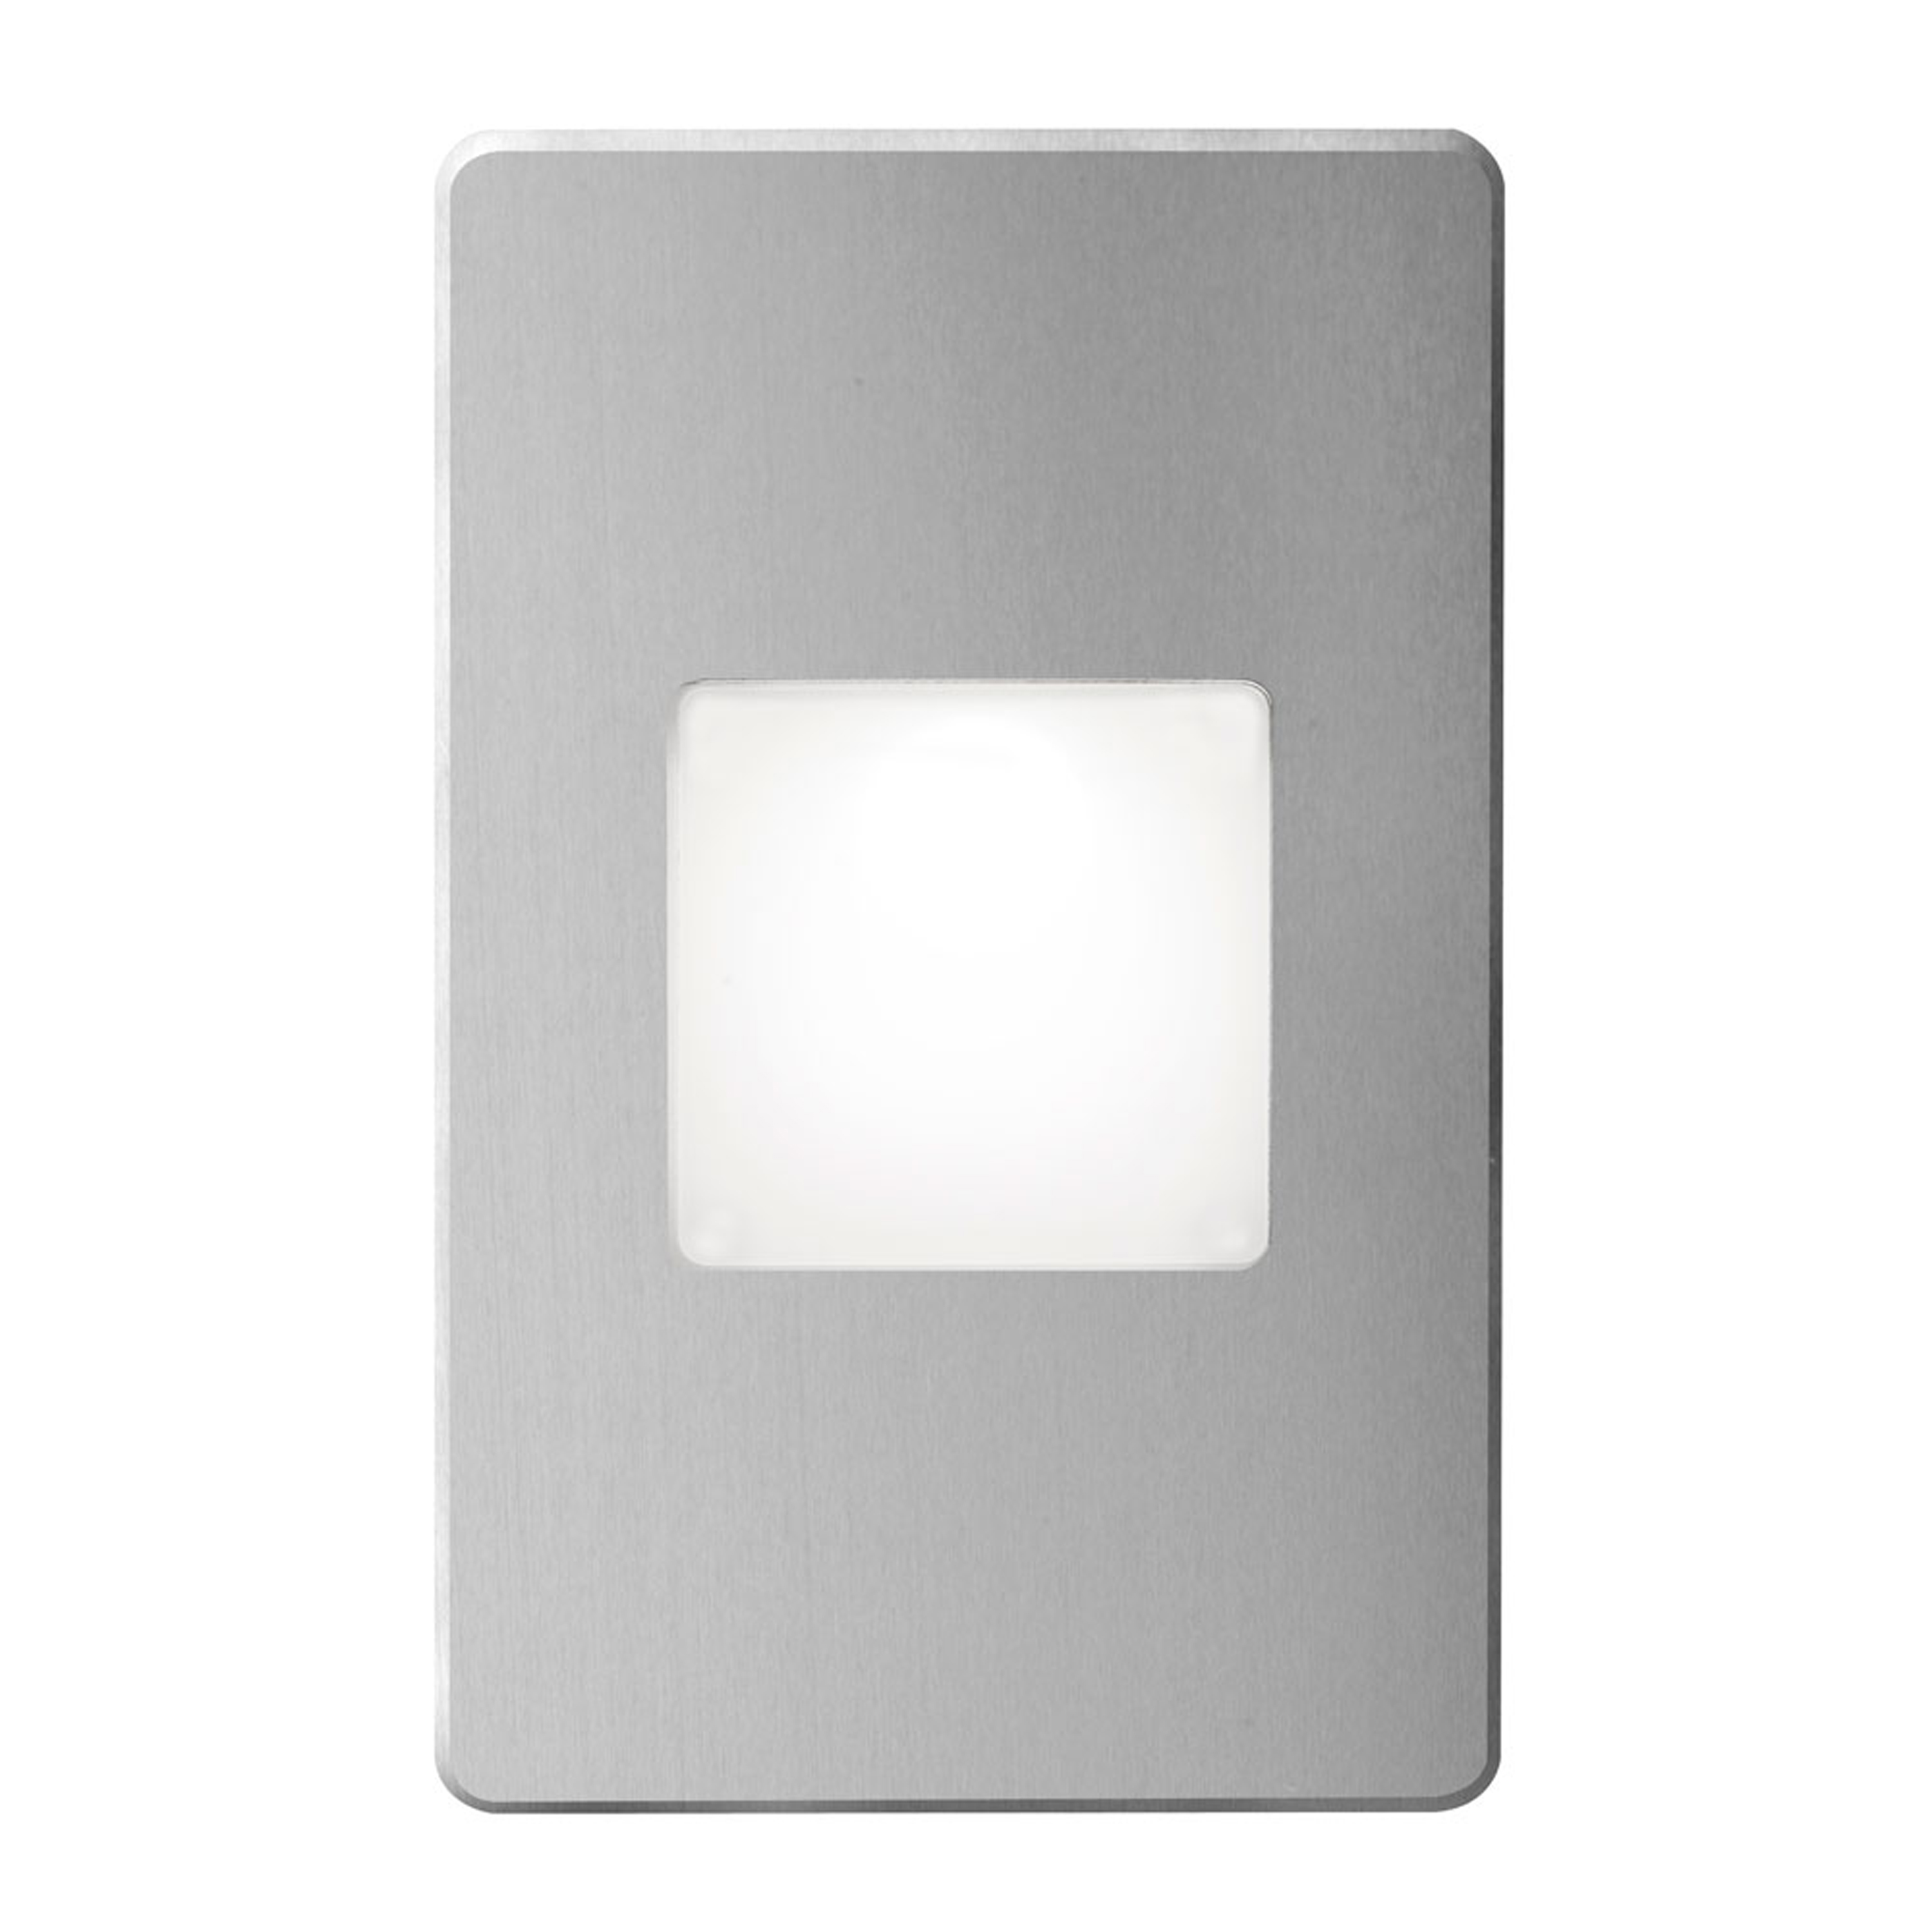 120VAC input, L125mmxW78mmxH37mm, 2700K, 3.3W IP65, Brushed Aluminum Wall LED Light with White Lens.